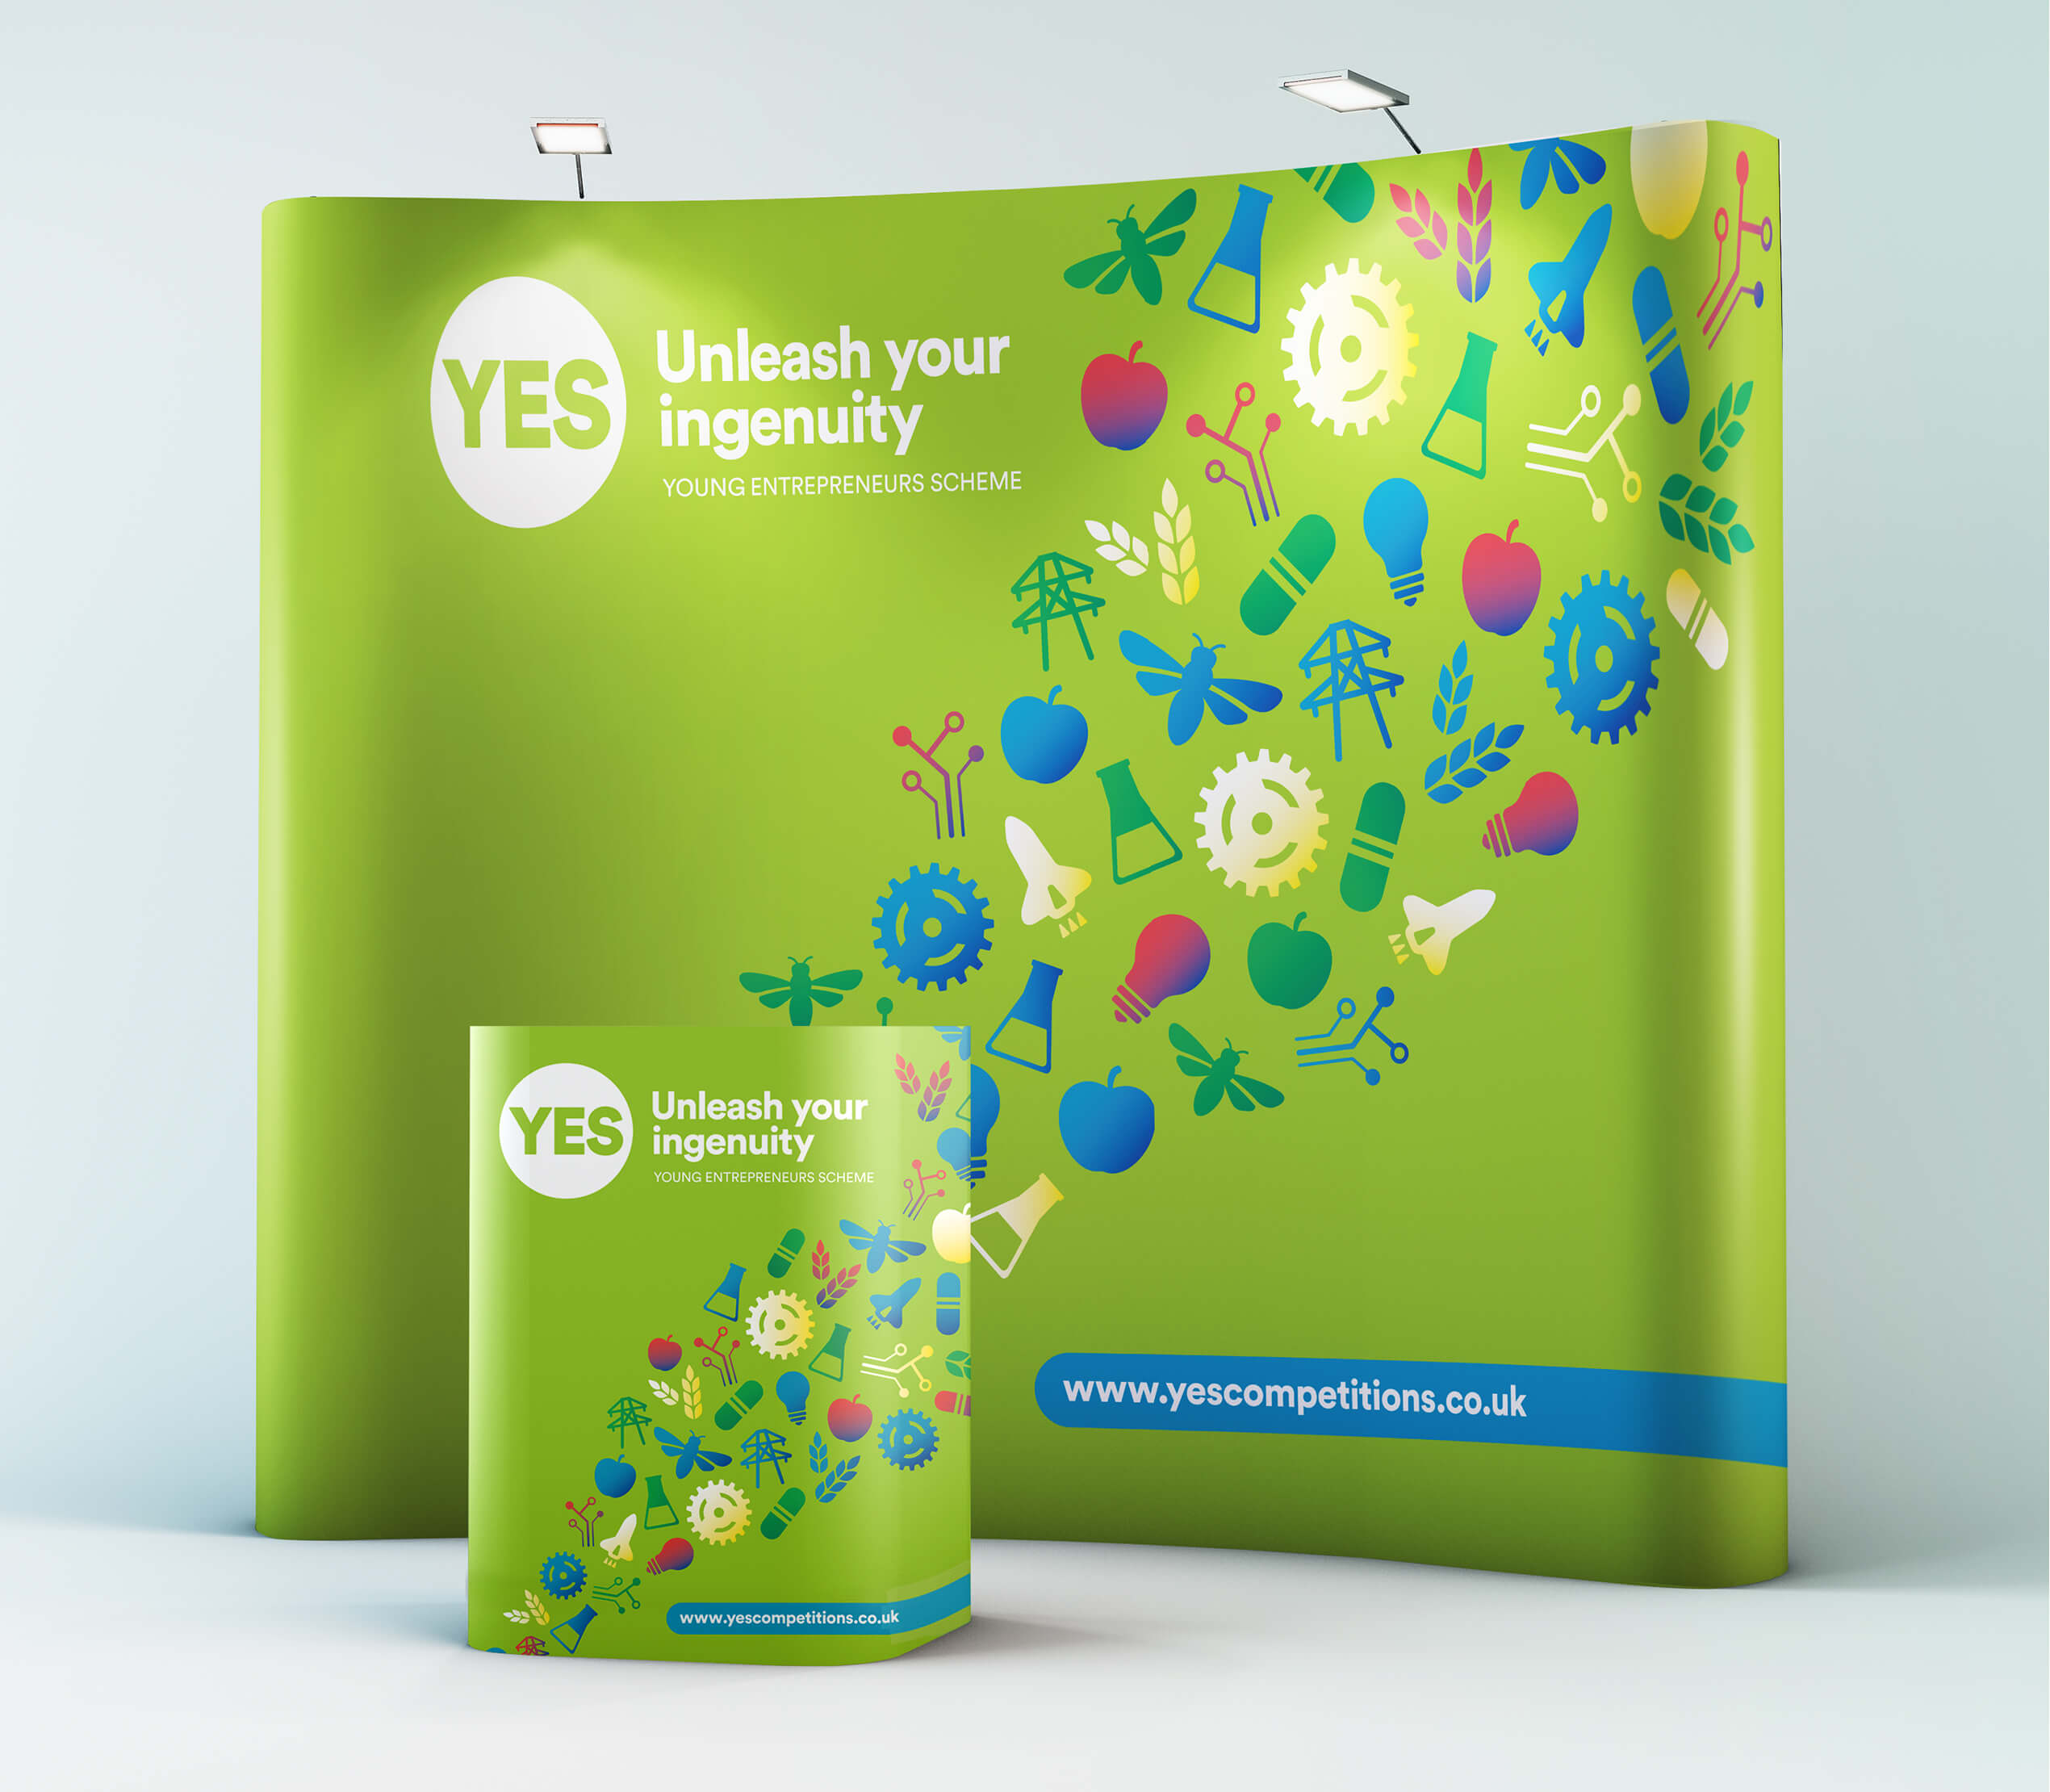 YES Competitions / University of Nottingham